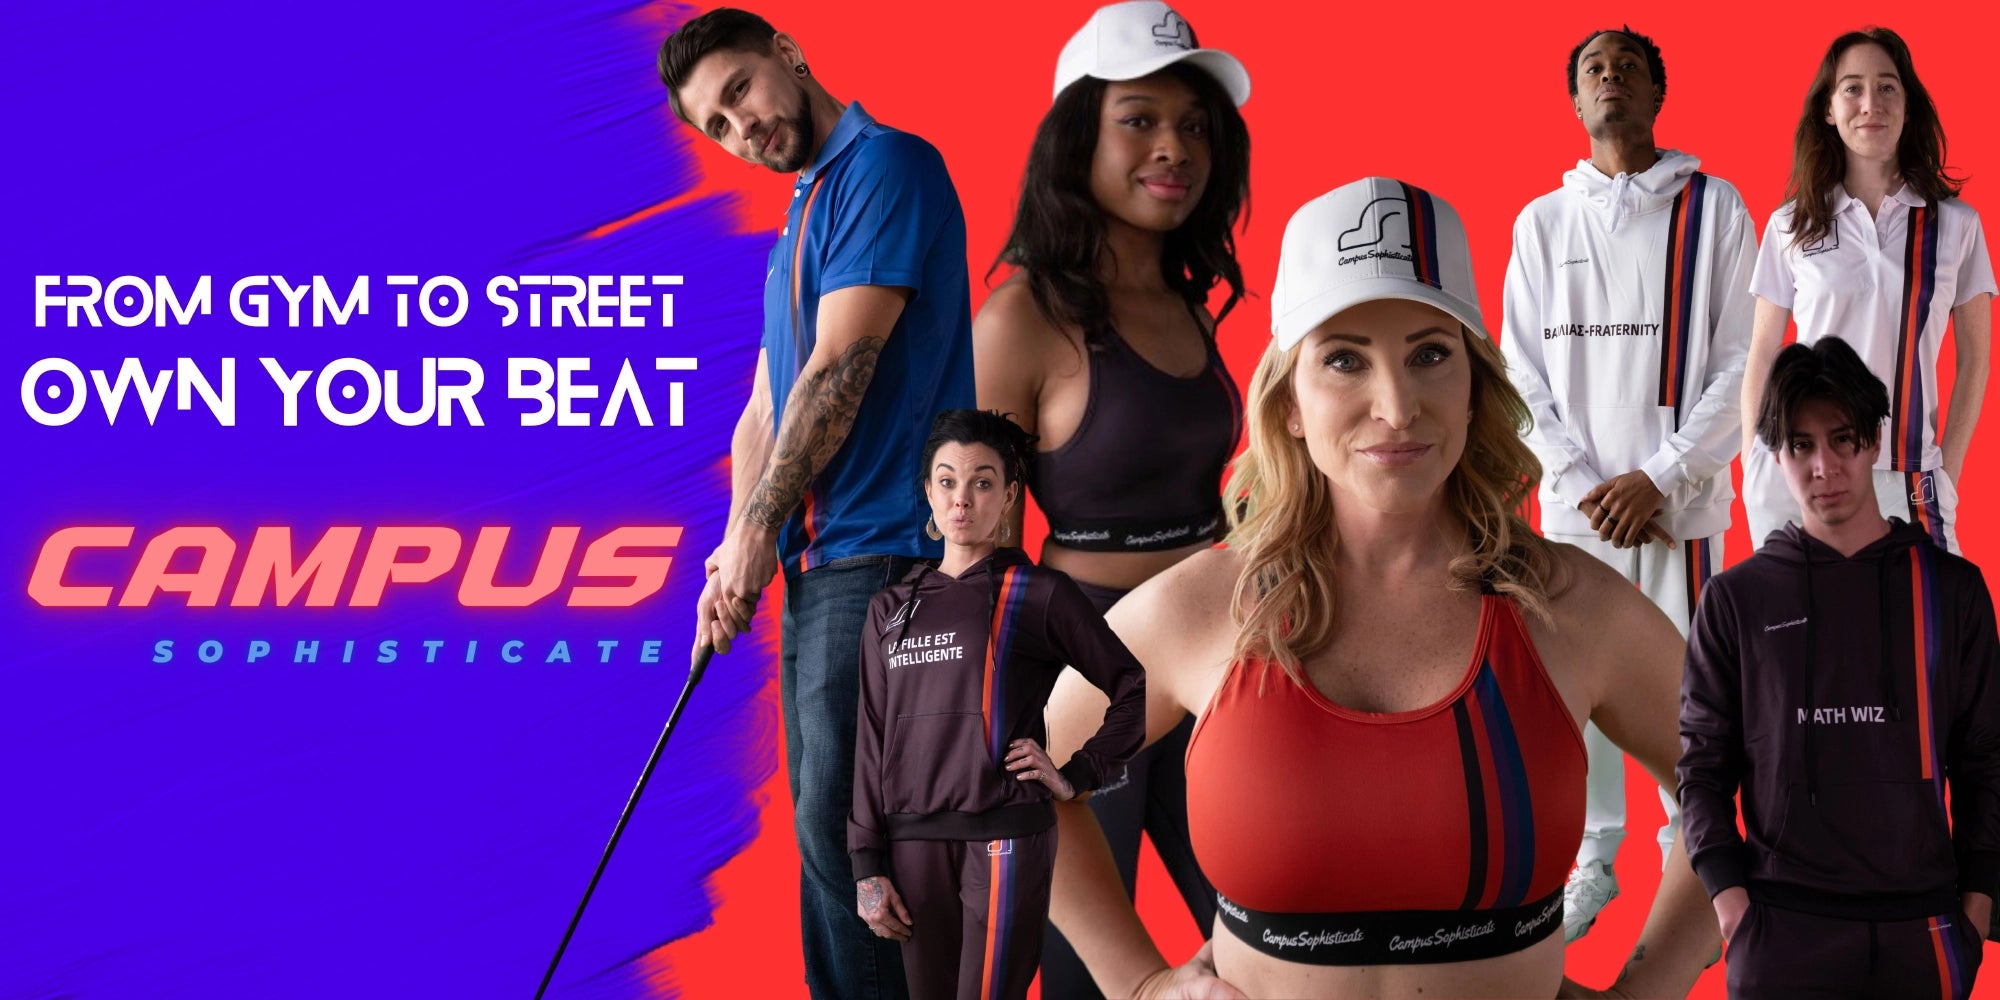 athletes wearing activewear of campussophisticate brand